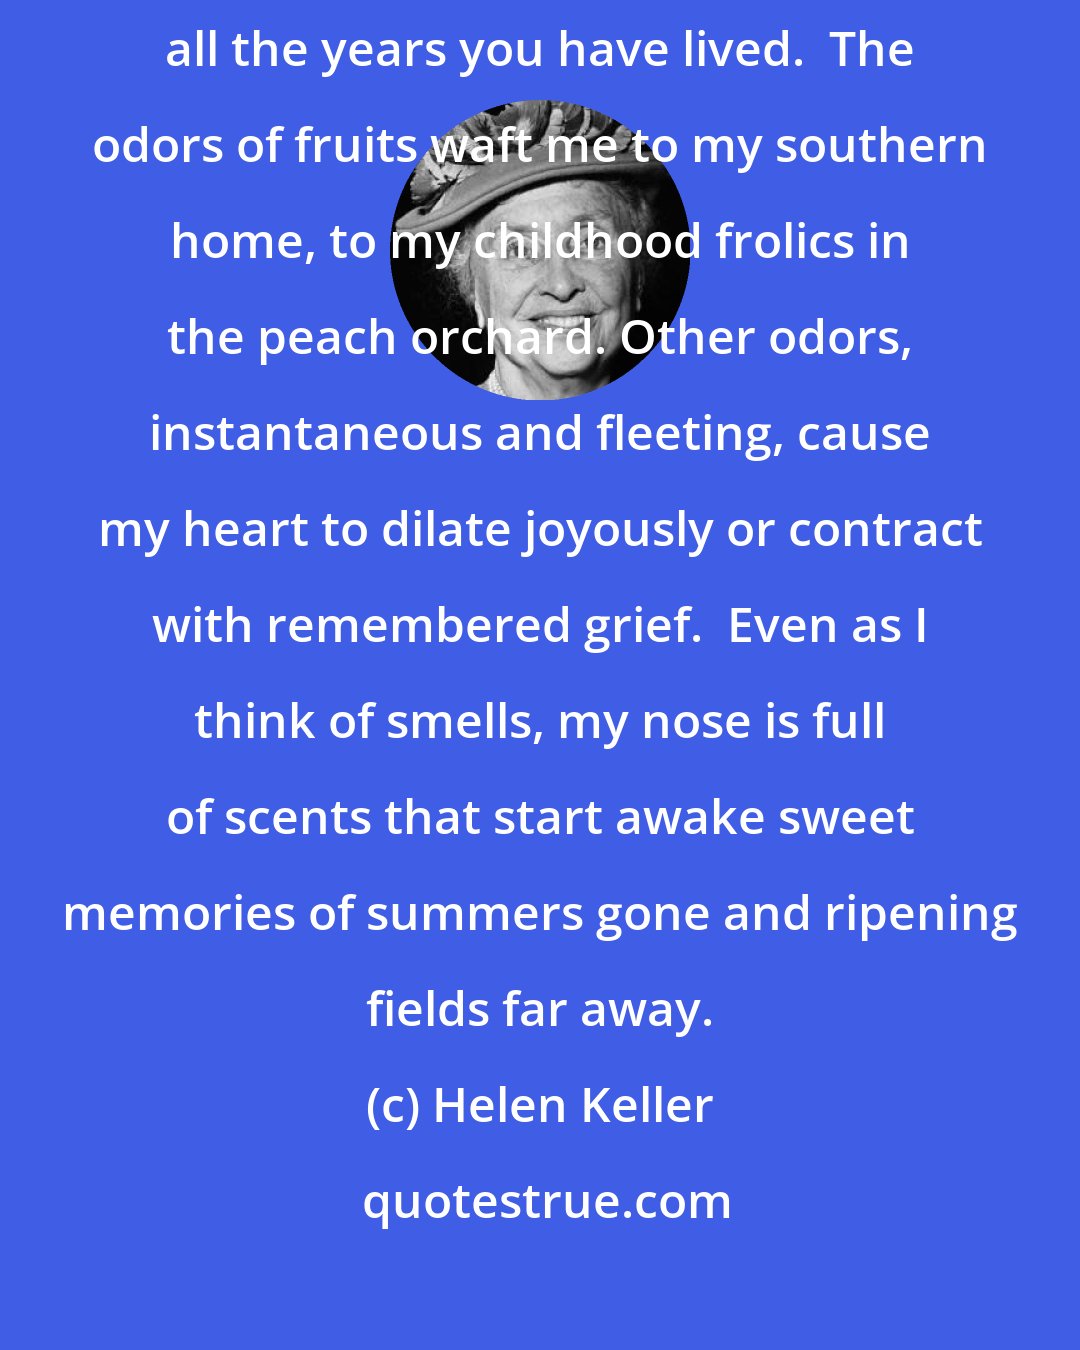 Helen Keller: Smell is a potent wizard that transports you across thousands of miles and all the years you have lived.  The odors of fruits waft me to my southern home, to my childhood frolics in the peach orchard. Other odors, instantaneous and fleeting, cause my heart to dilate joyously or contract with remembered grief.  Even as I think of smells, my nose is full of scents that start awake sweet memories of summers gone and ripening fields far away.